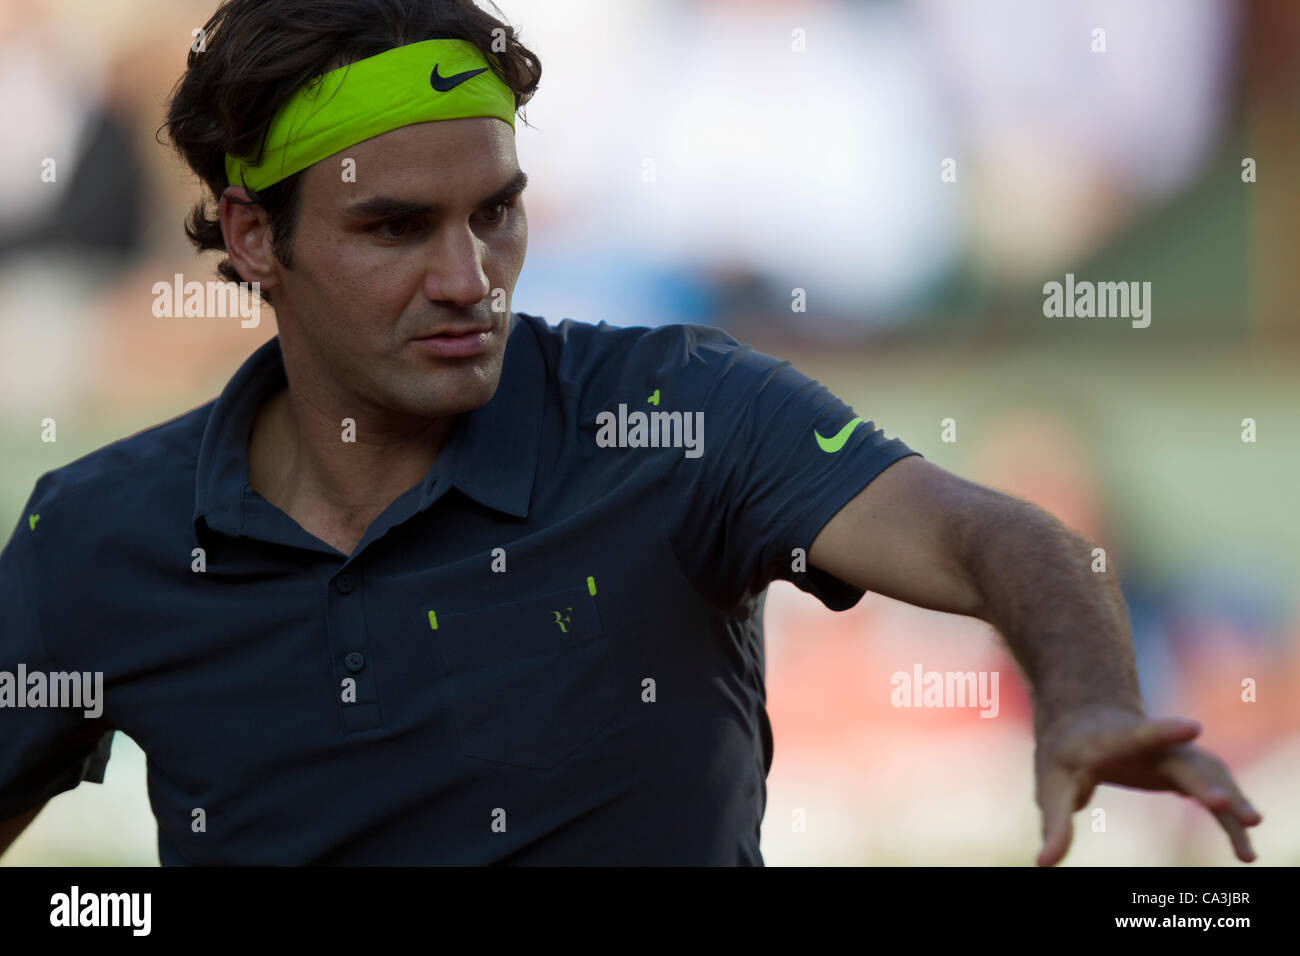 01.06.2012 Paris, France. Roger Federer in action against Nicolas Mahut on day 6 of the French Open Tennis from Roland Garros. Stock Photo